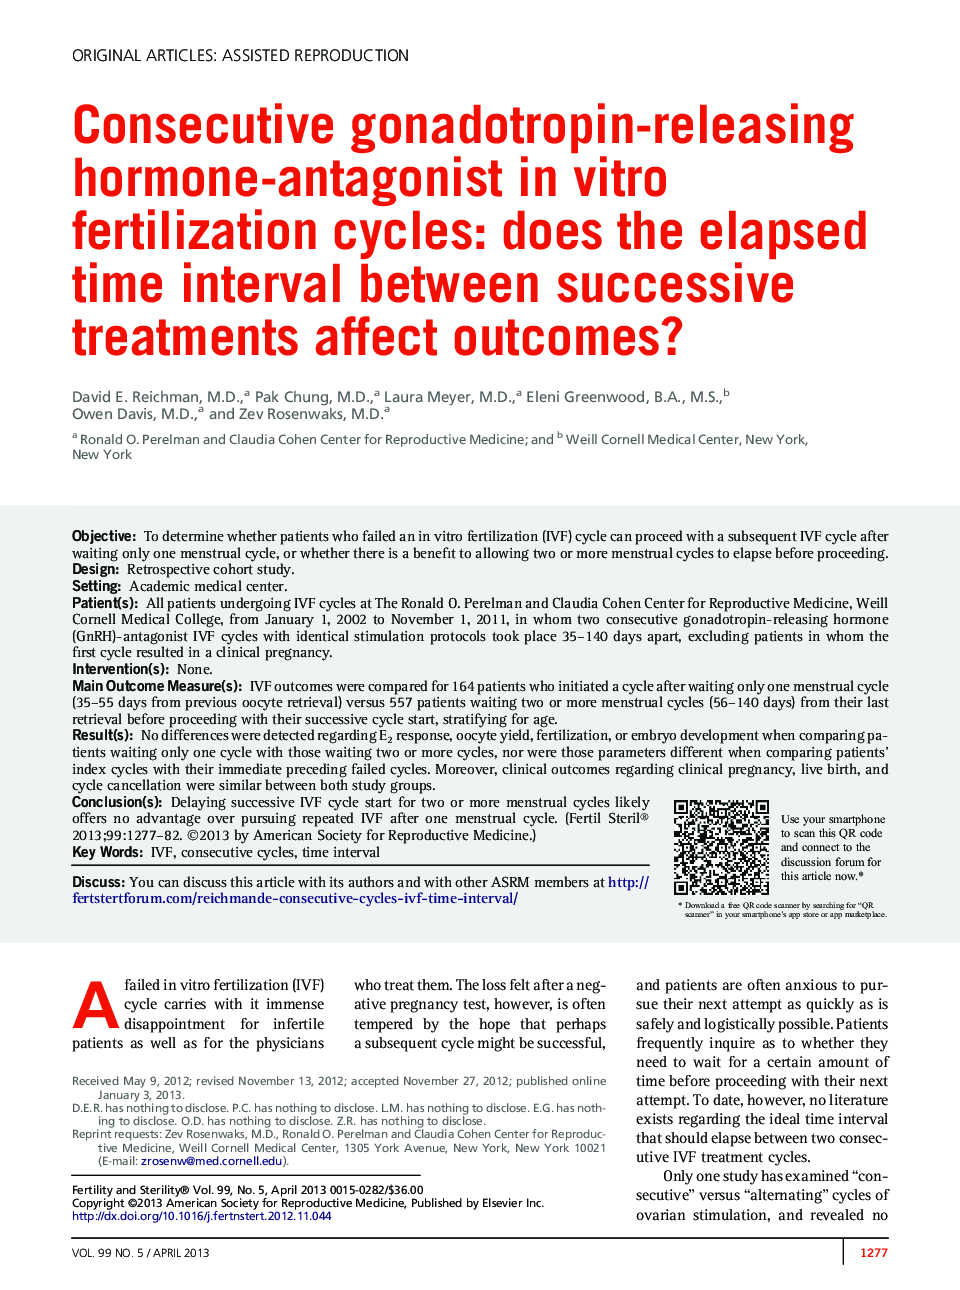 Consecutive gonadotropin-releasing hormone-antagonist in vitro fertilization cycles: does the elapsed time interval between successive treatments affect outcomes? 